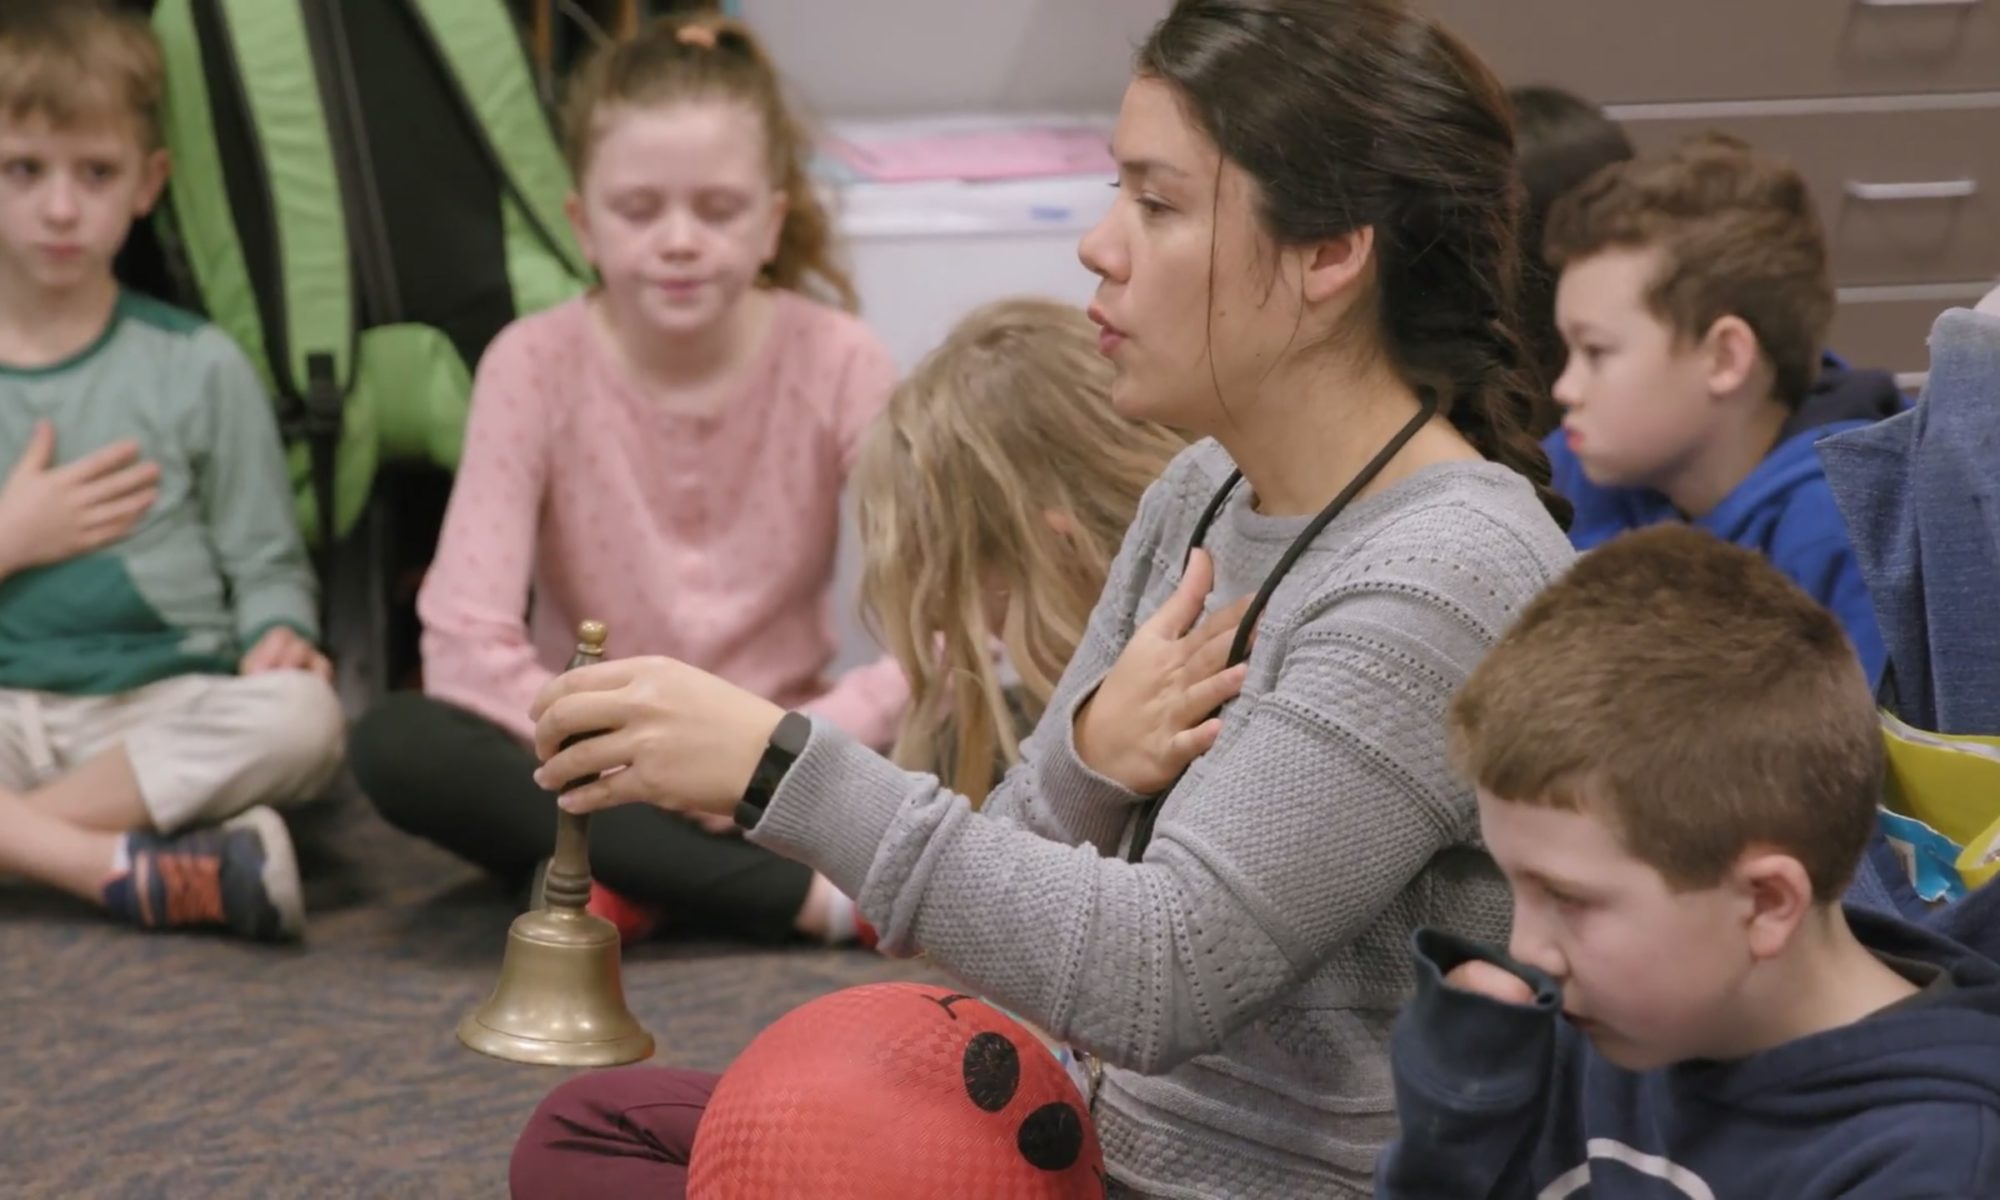 Teacher holding her chest and bell, teaching breathing exercises to students who are sitting on the floor in a classroom